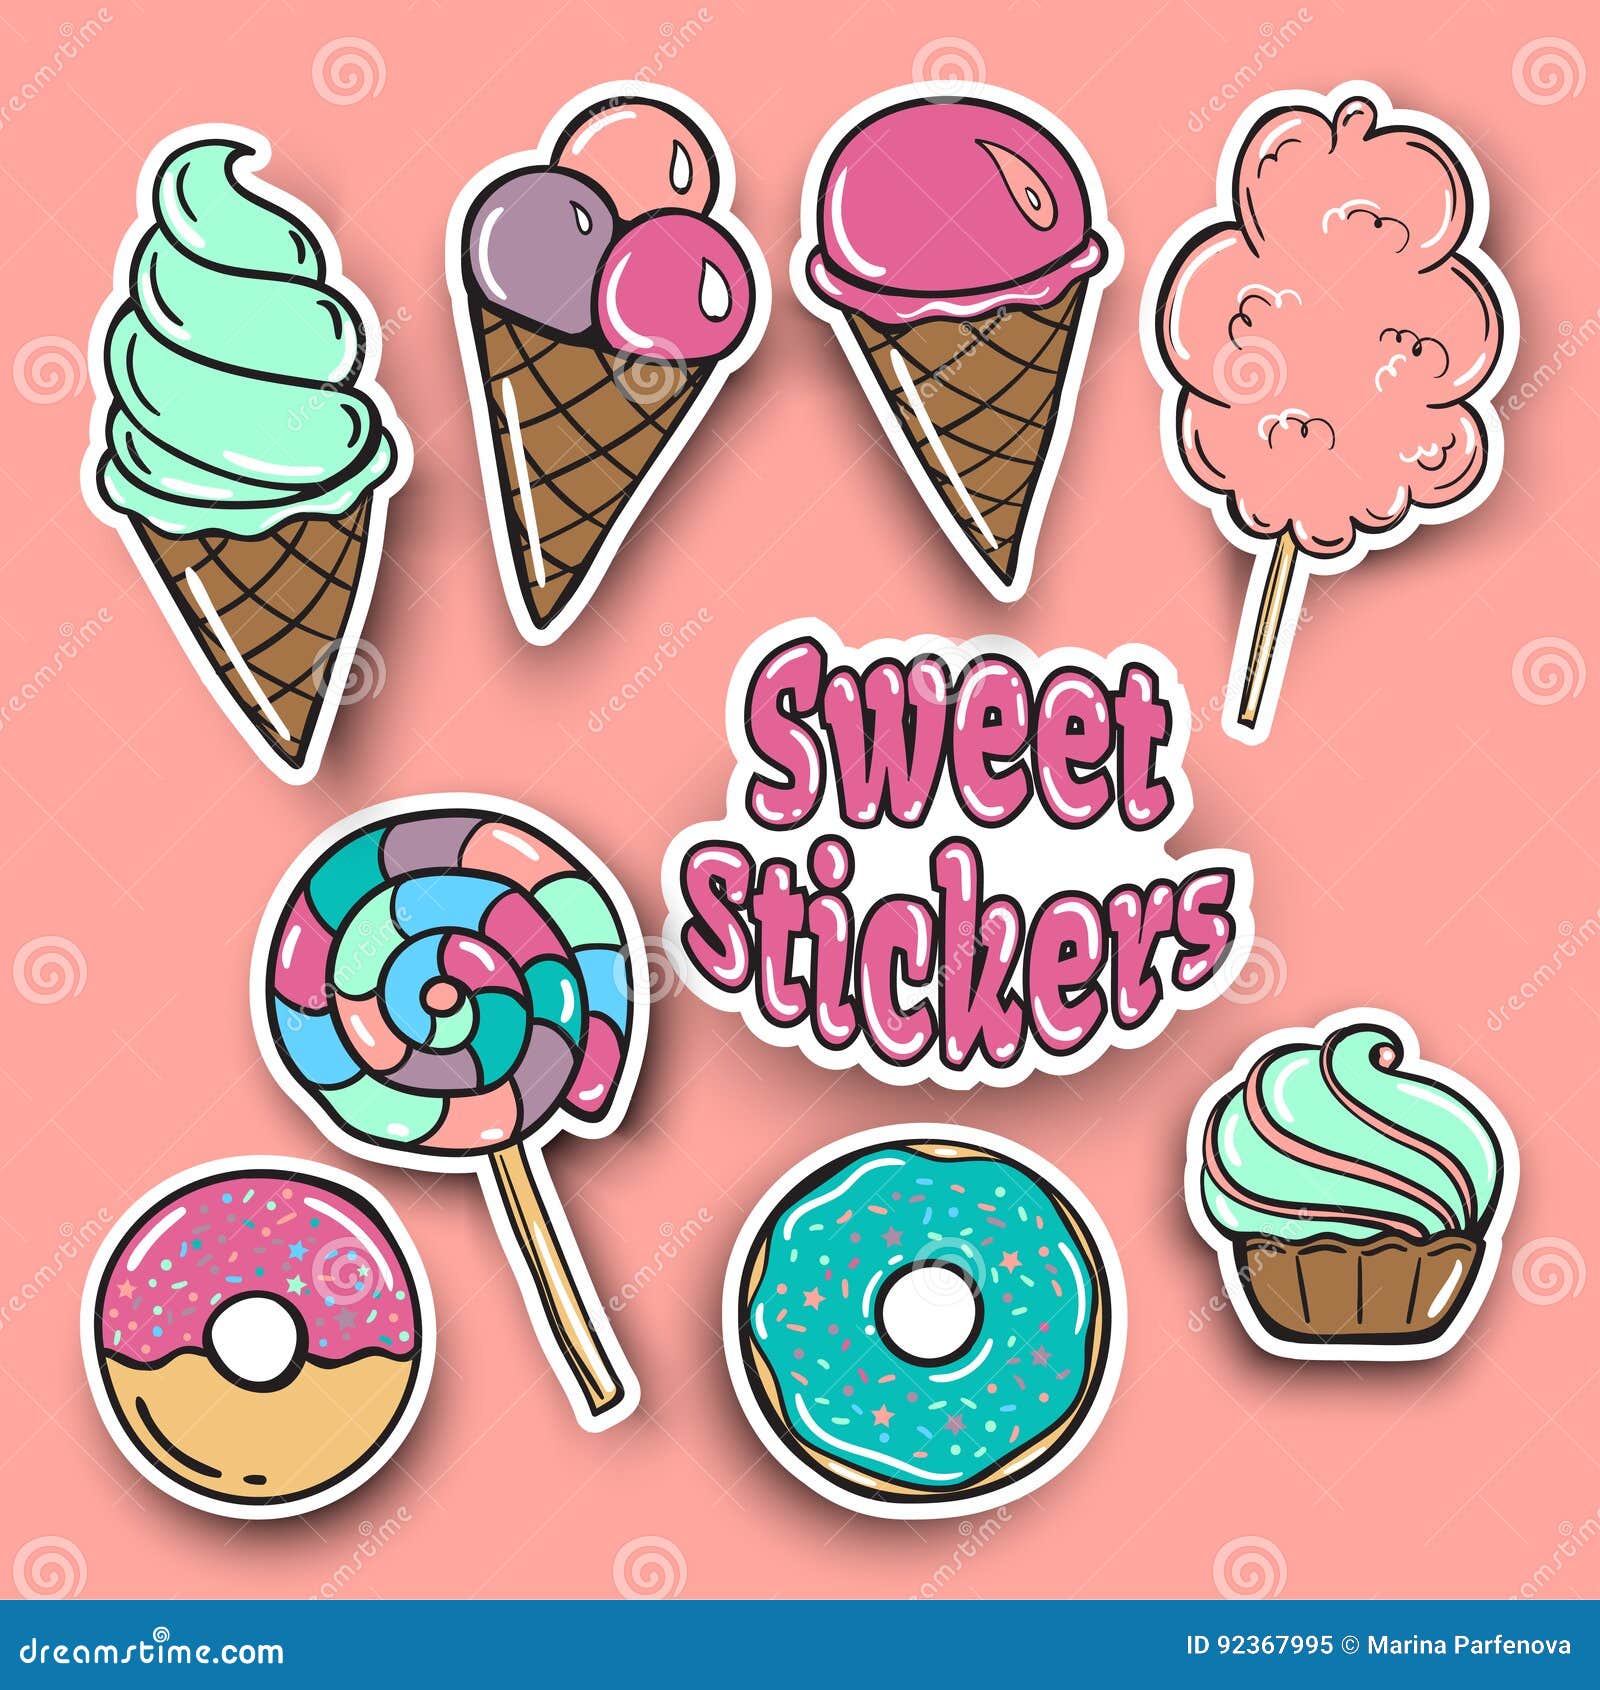 Sweets Food Ice Cream Cookie Car Bumper Sticker Decal 5" x 5"